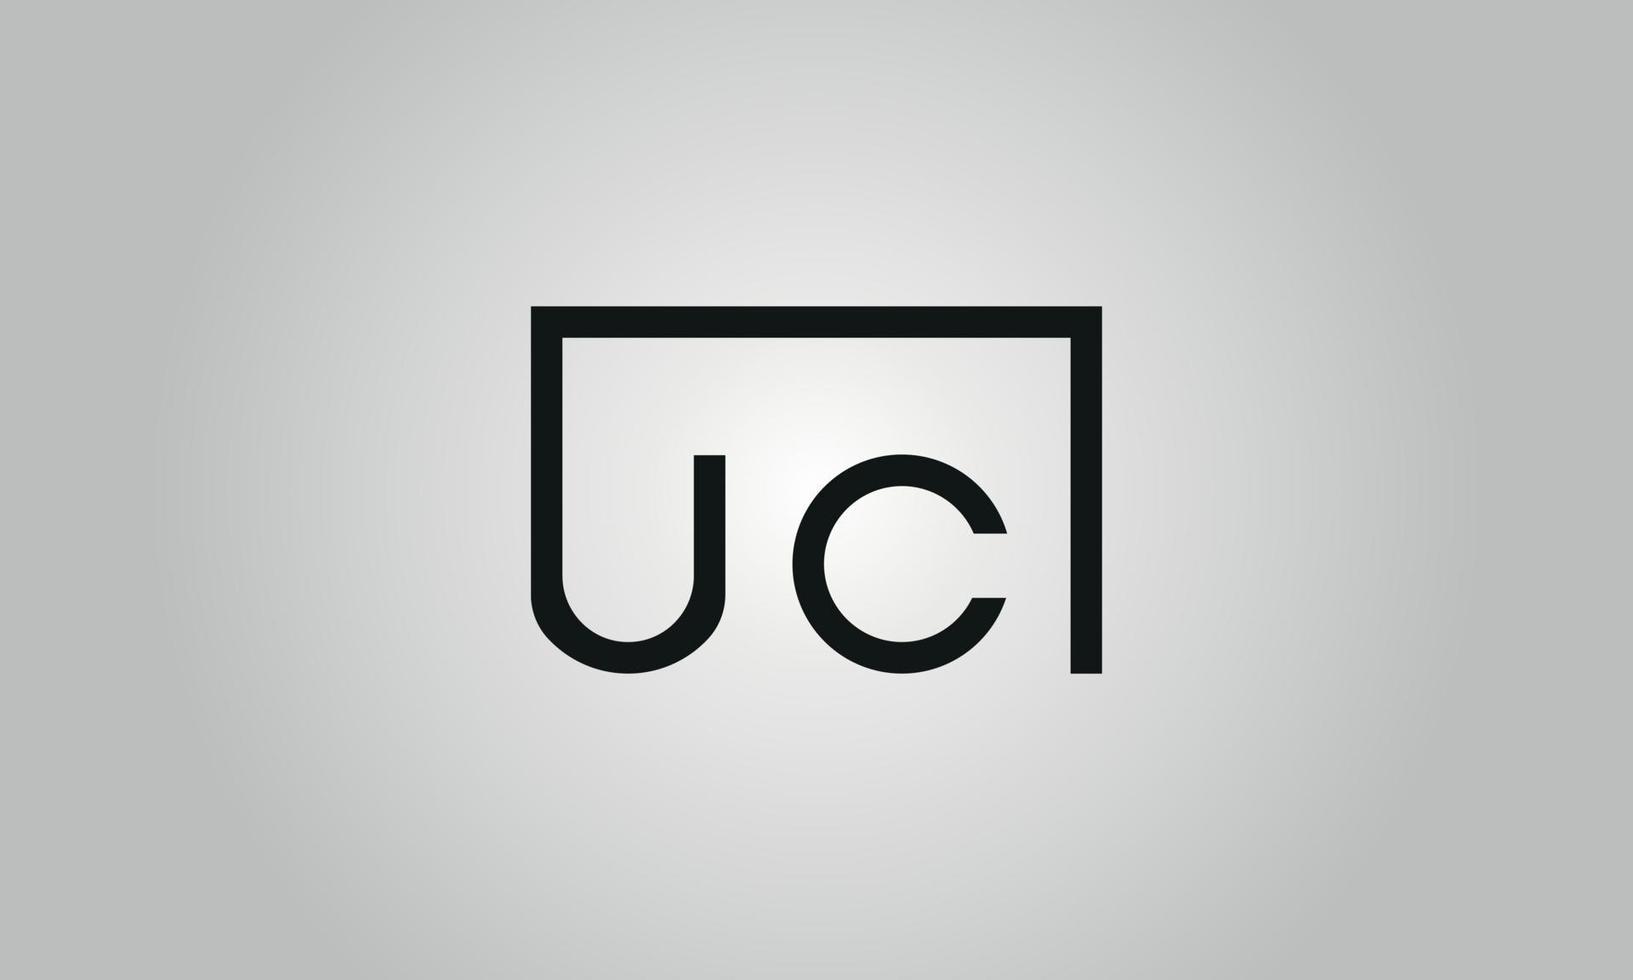 Letter UC logo design. UC logo with square shape in black colors vector free vector template.